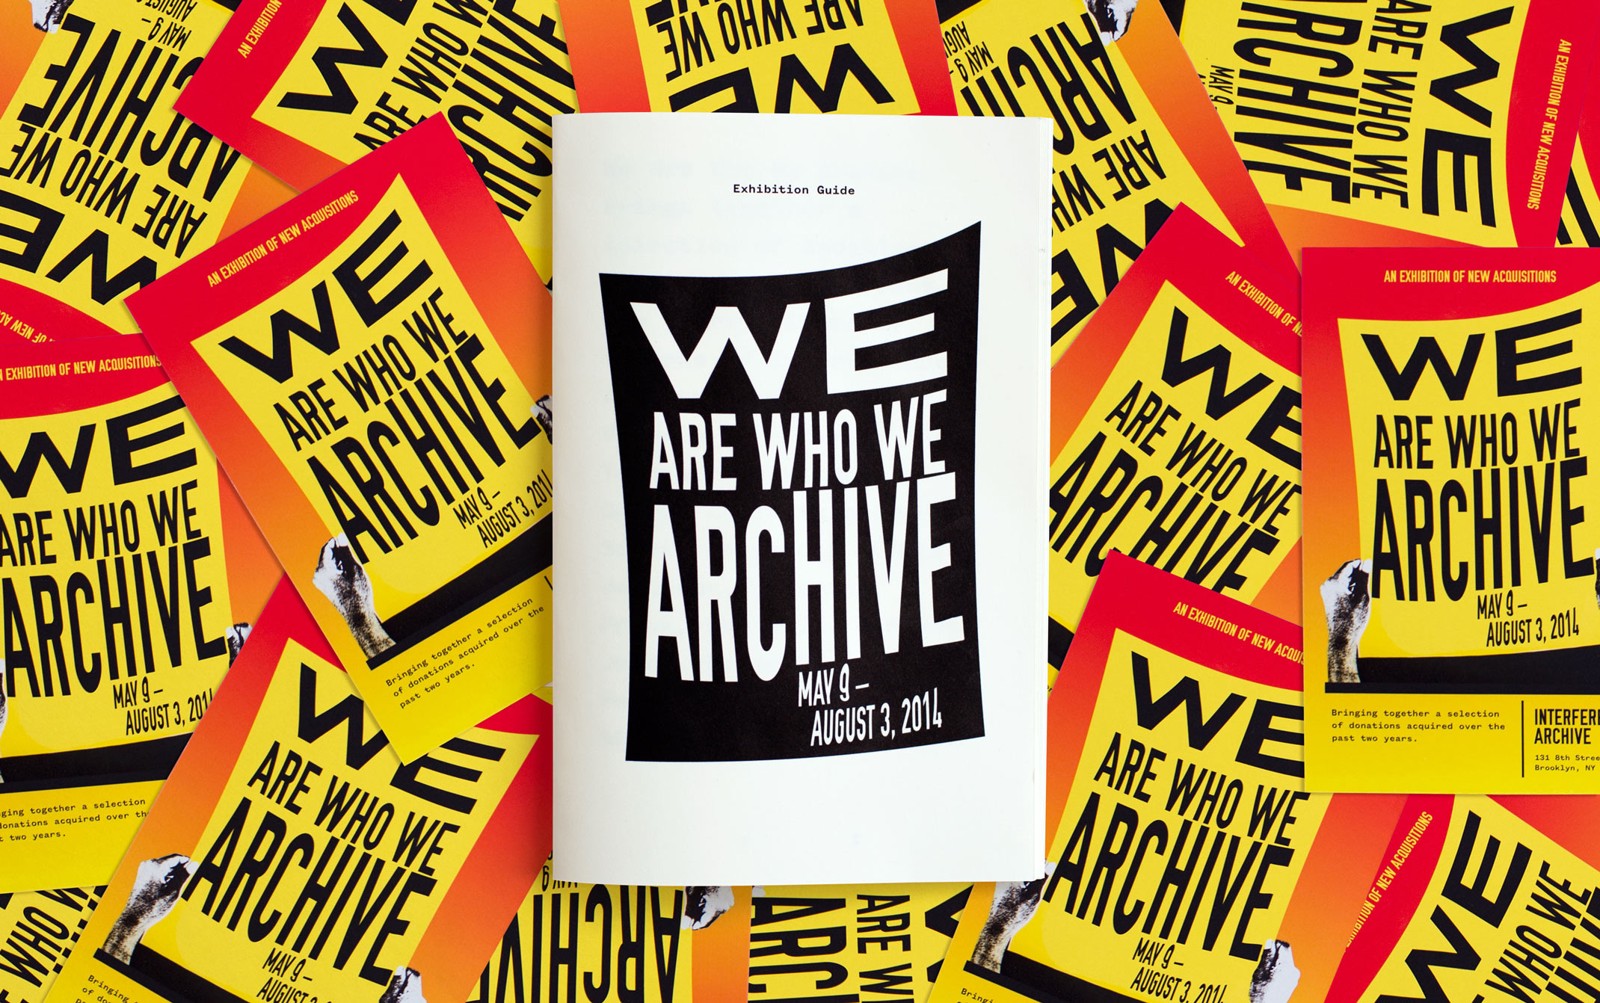 We Are Who We Archive